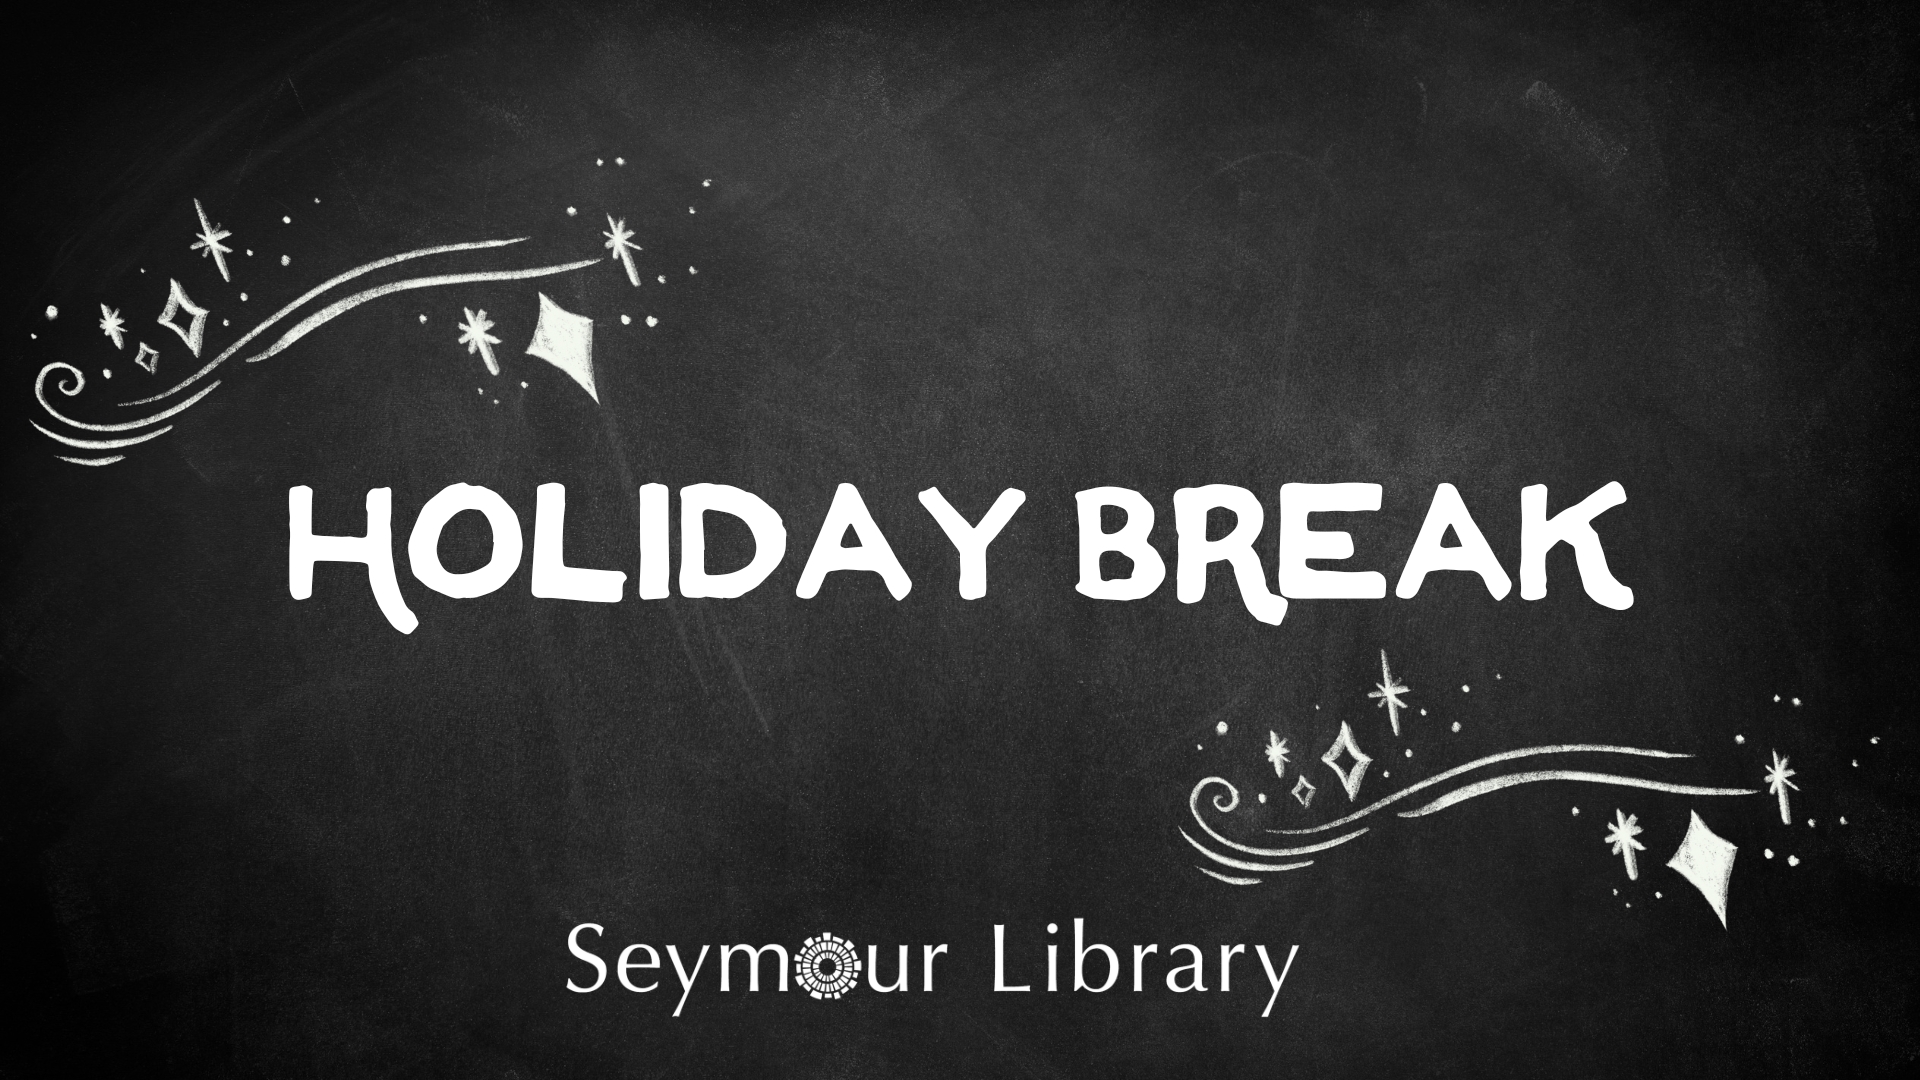 Holiday Break written on a chalkboard with the Seymour Library Logo and chalk stars and doodles.